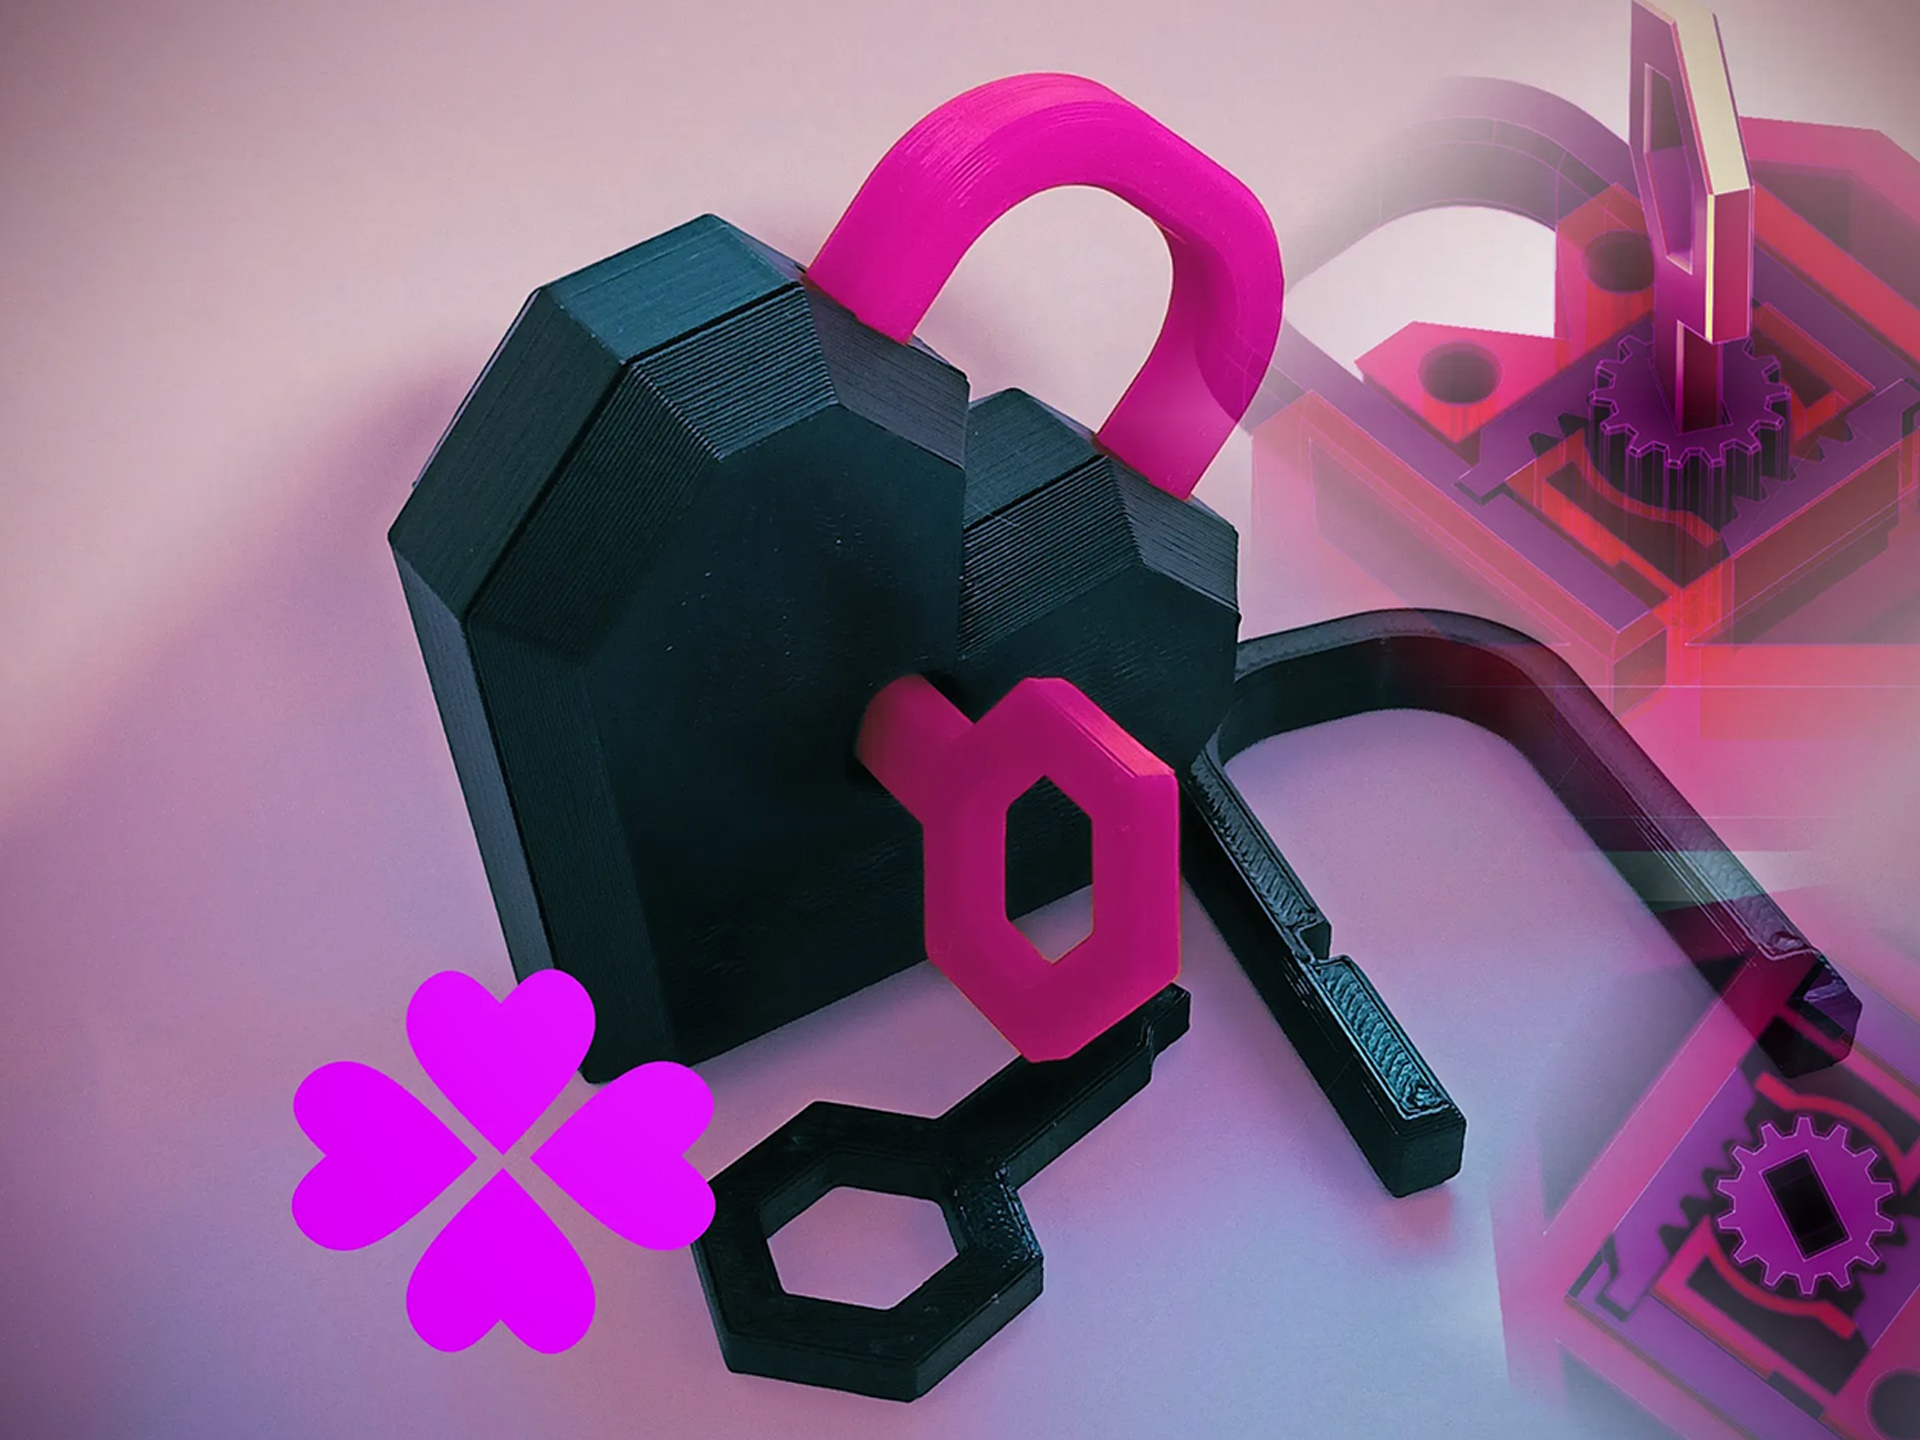 UNYQ & IKEA develop three personalised gaming accessories with 3D printing  - TCT Magazine